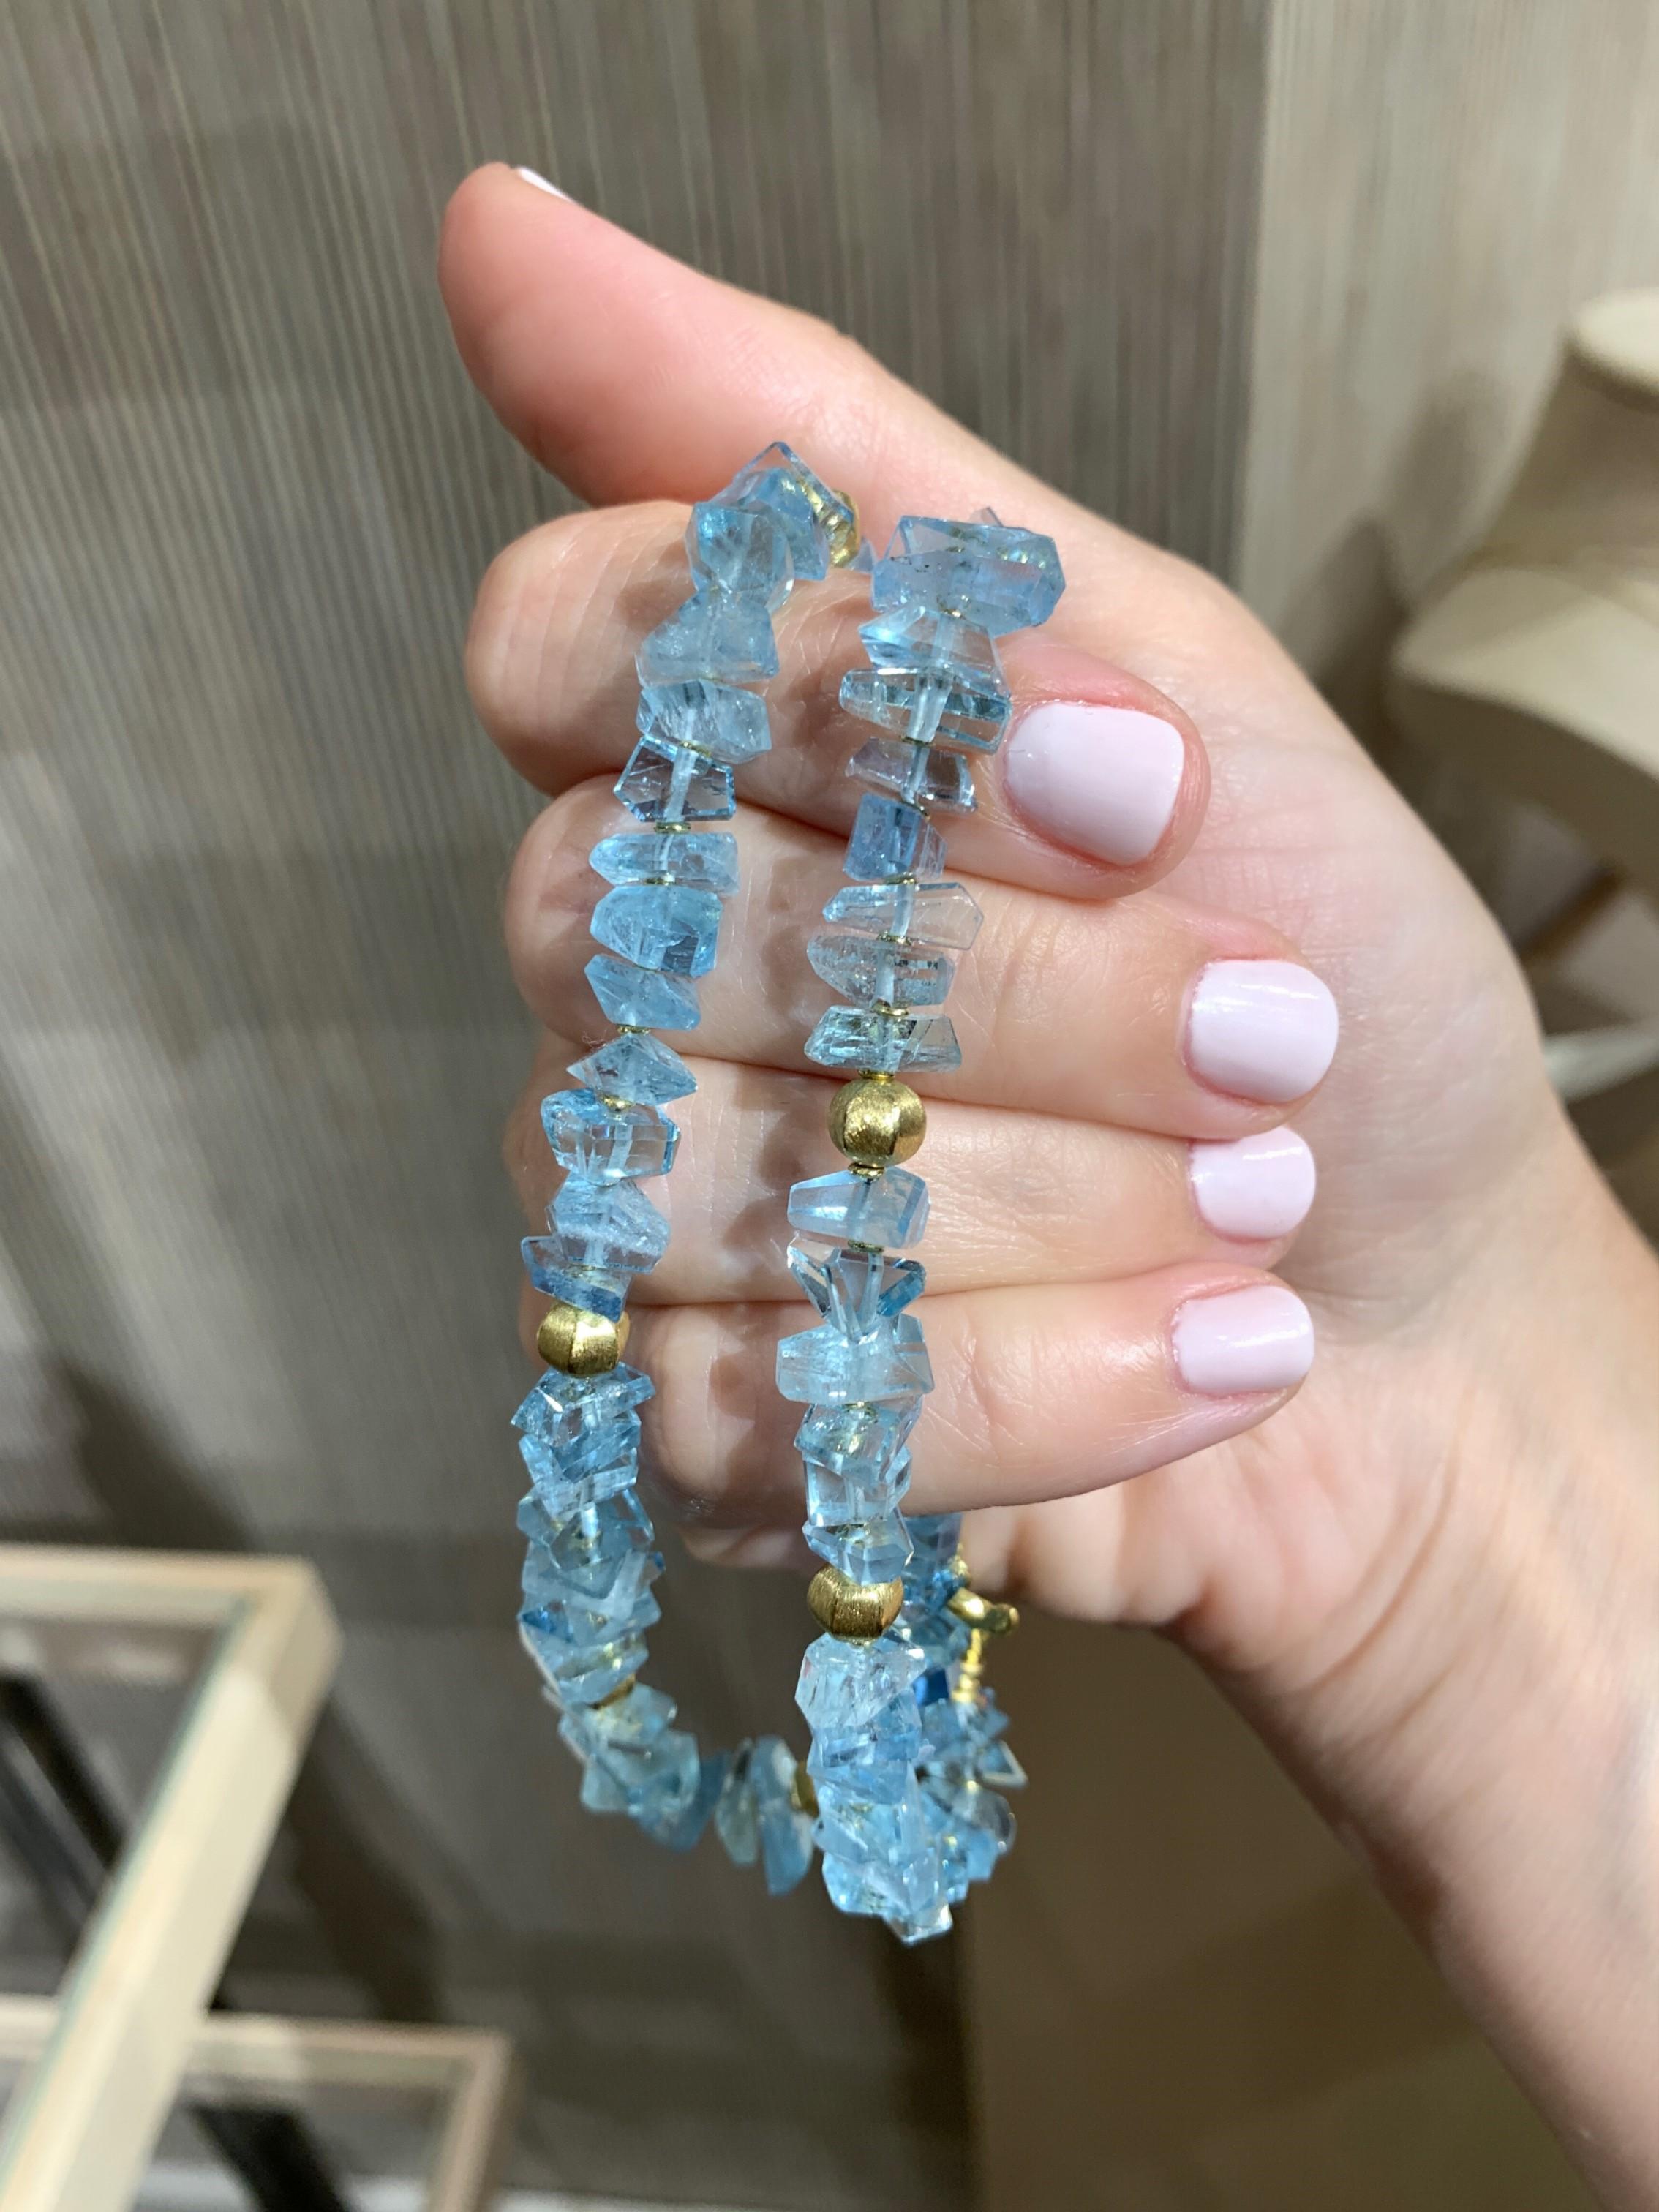 One of a Kind Facets Necklace hand-fabricated by award-winning jewelry maker Barbara Heinrich featuring 133.33 carats of magnificent faceted aquamarine accented with nine solid 18k yellow gold elements in the artist's signature-finished 18k yellow